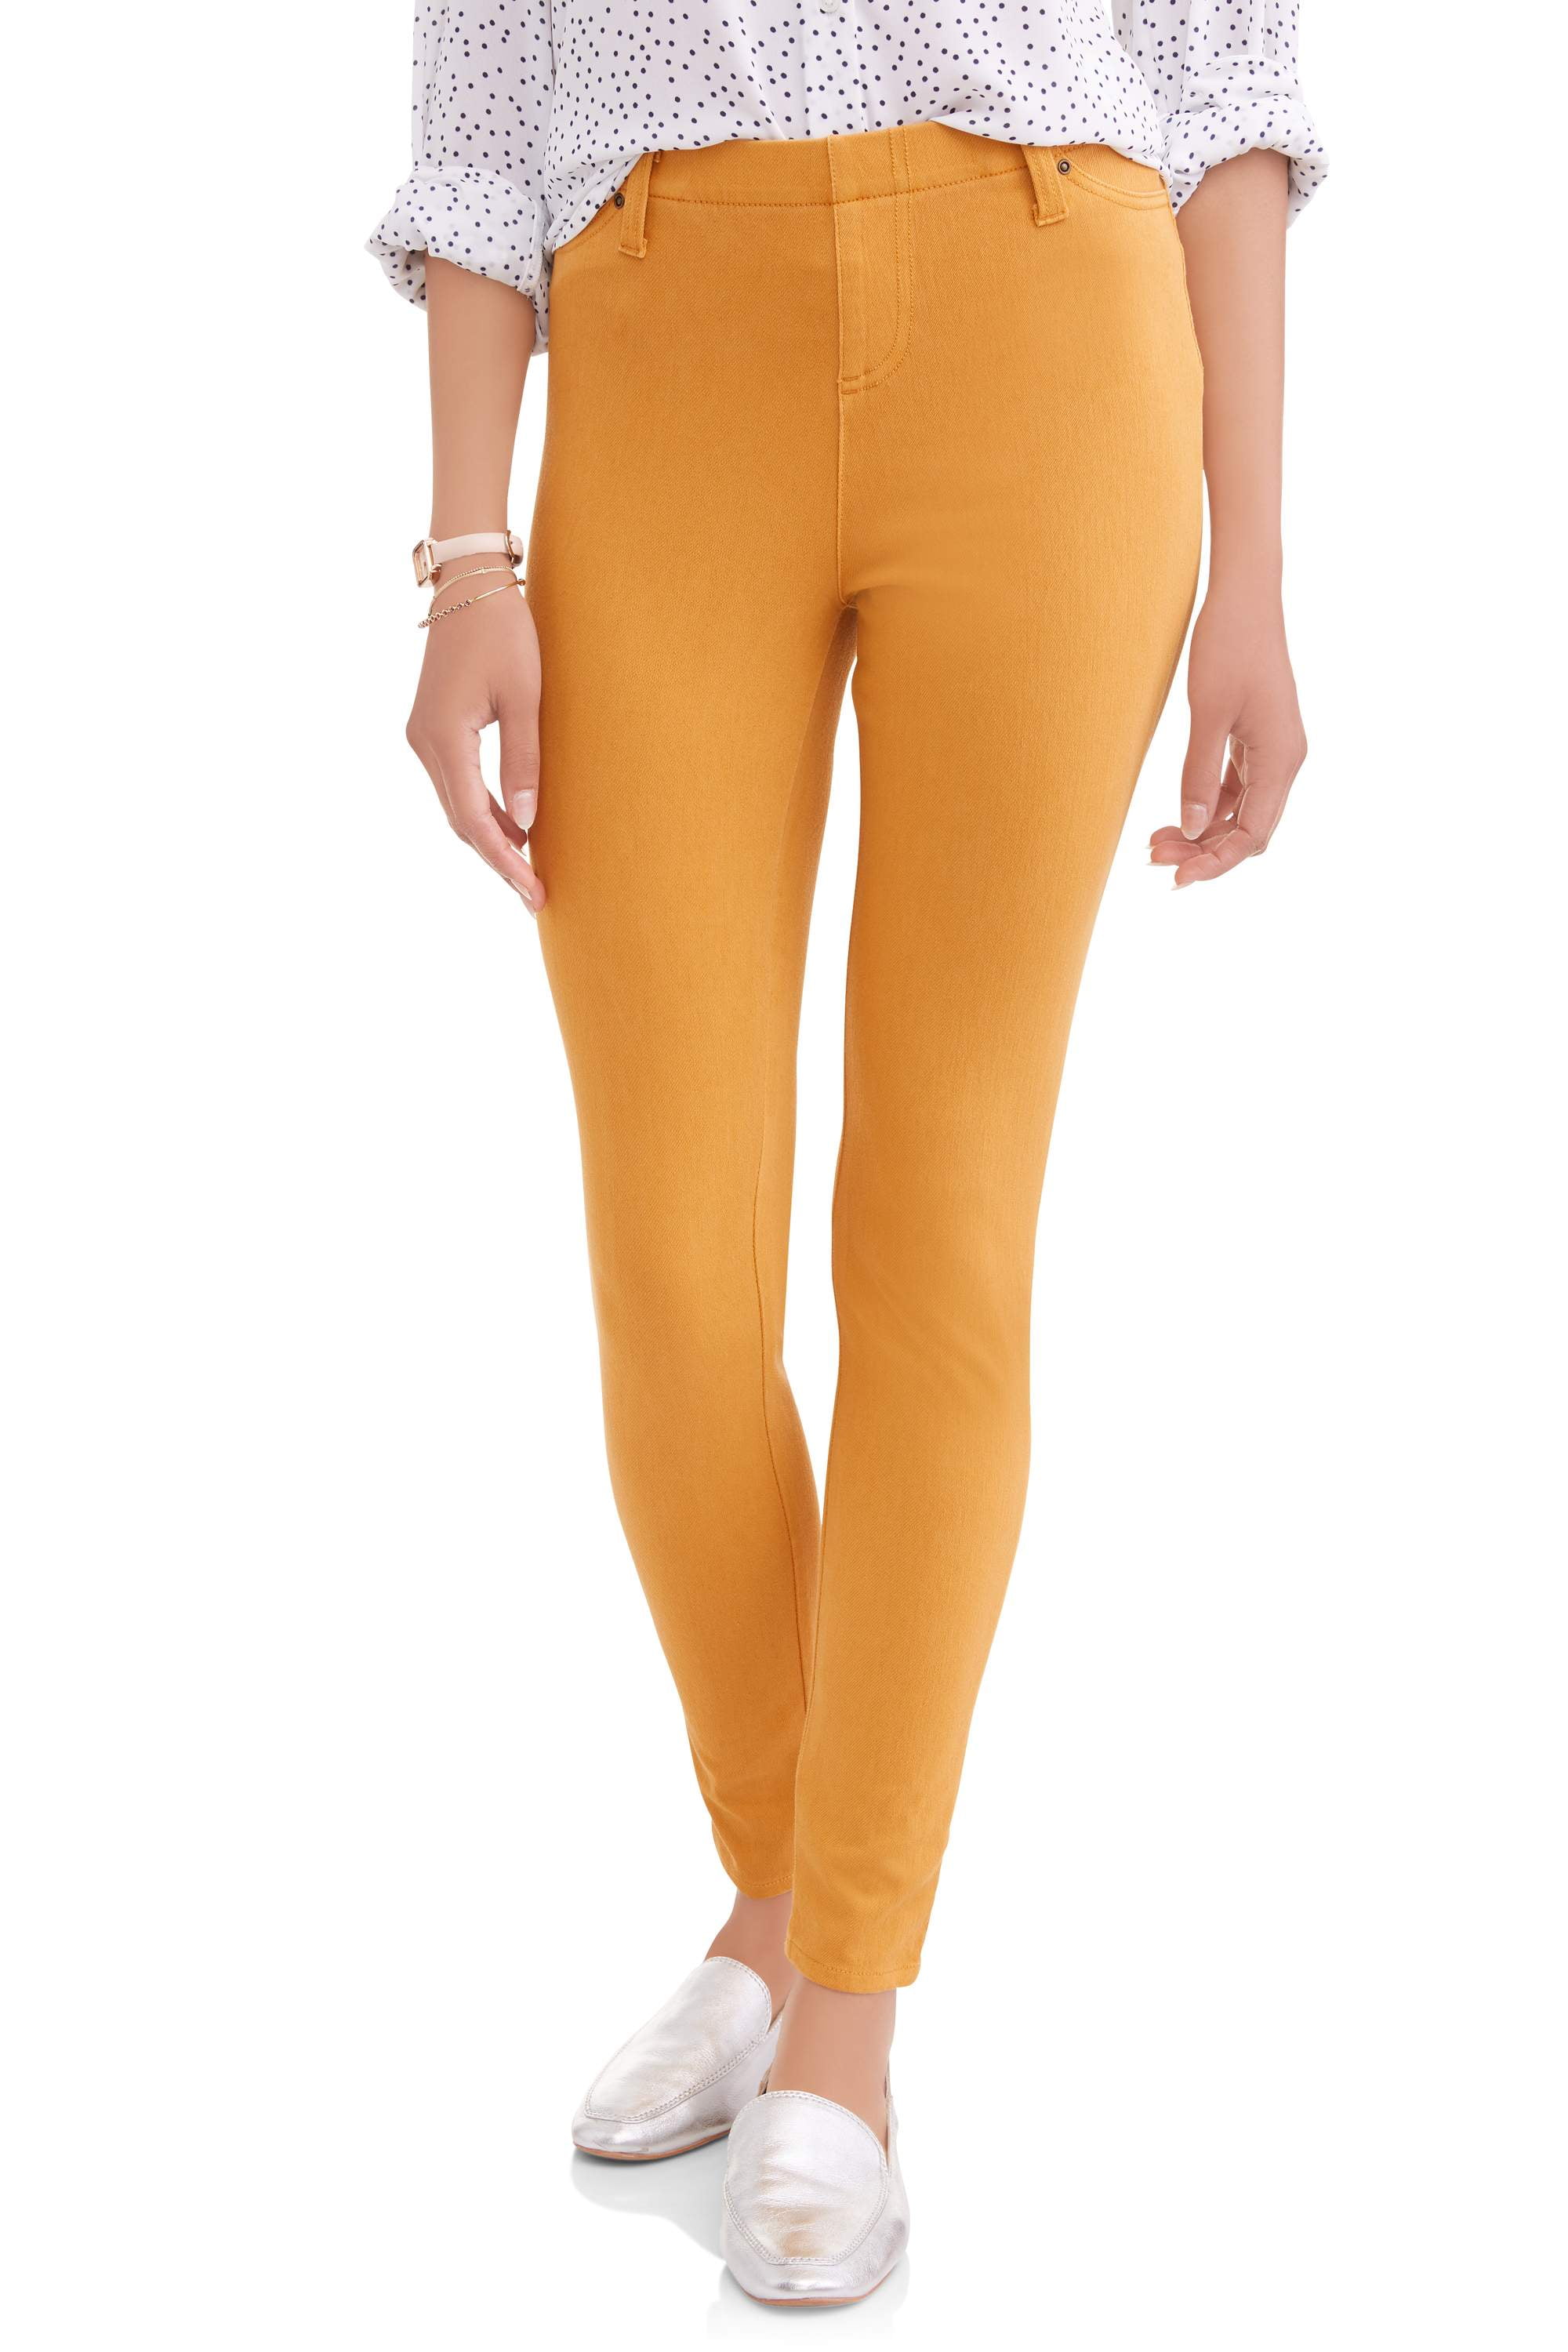 Time and Tru Women's Full Length Soft Knit Color Jeggings